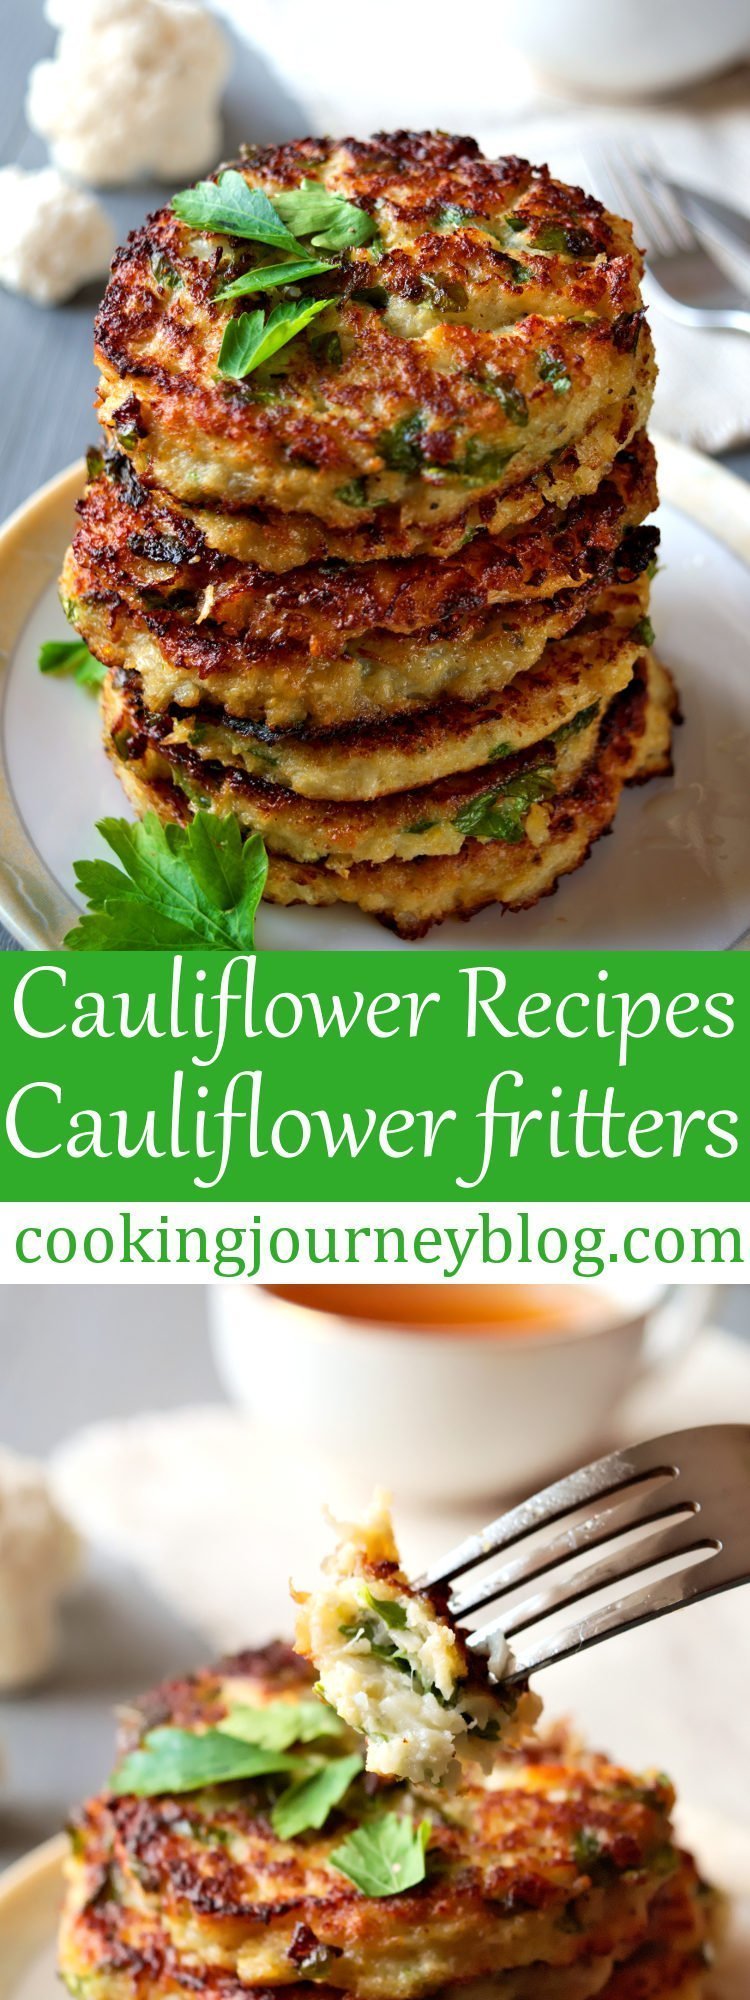 Cauliflower fritters – best cauliflower recipe for healthy breakfast. You need no milk, no sugar to make this easy pancake recipe tasty! This is one of breakfast ideas for kids, that you should try. Learn how to make these cauliflower pancakes from scratch!